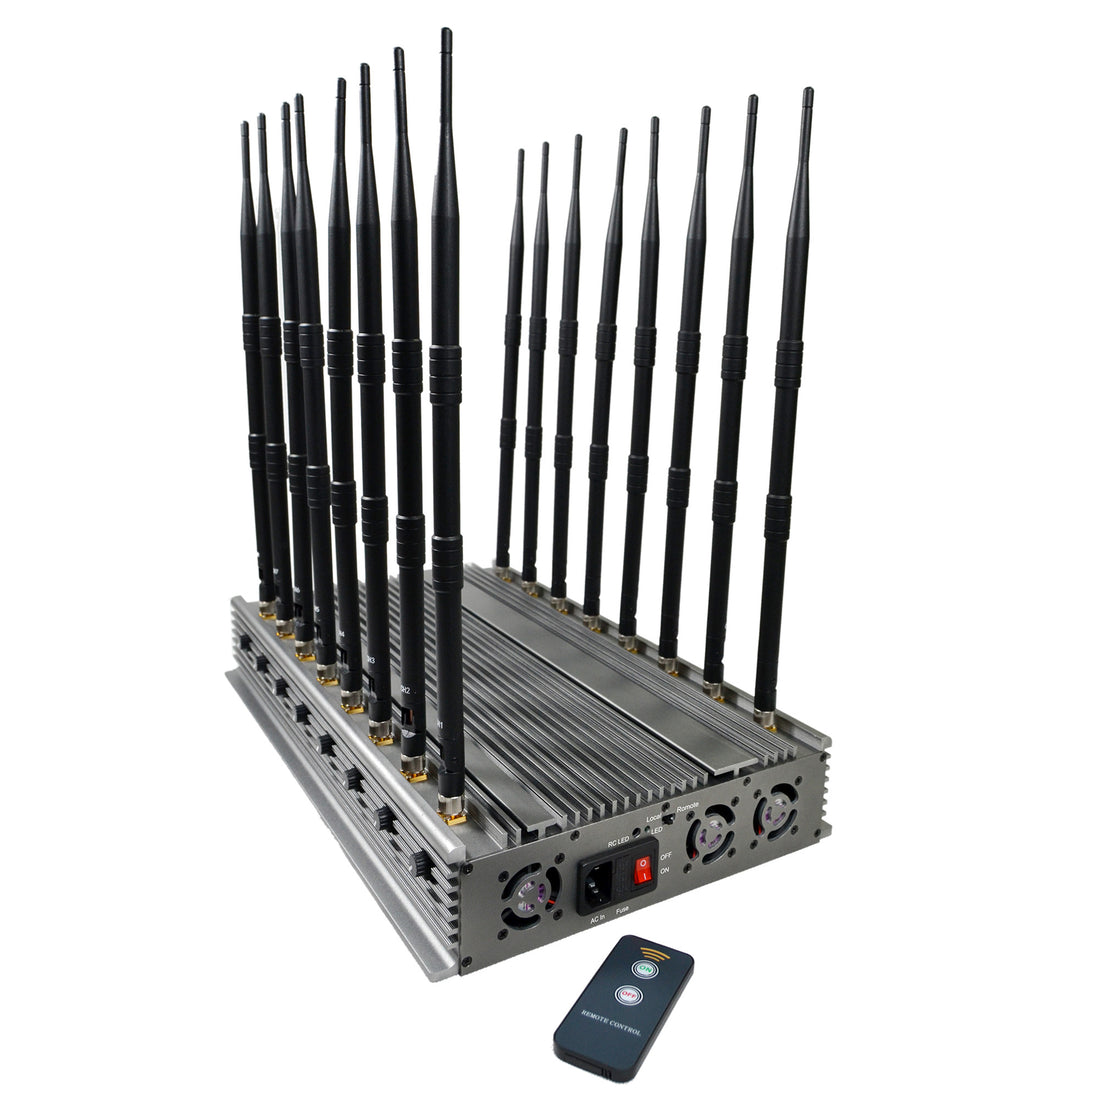 The shielding range and usage scenarios of the full-band signal jammer